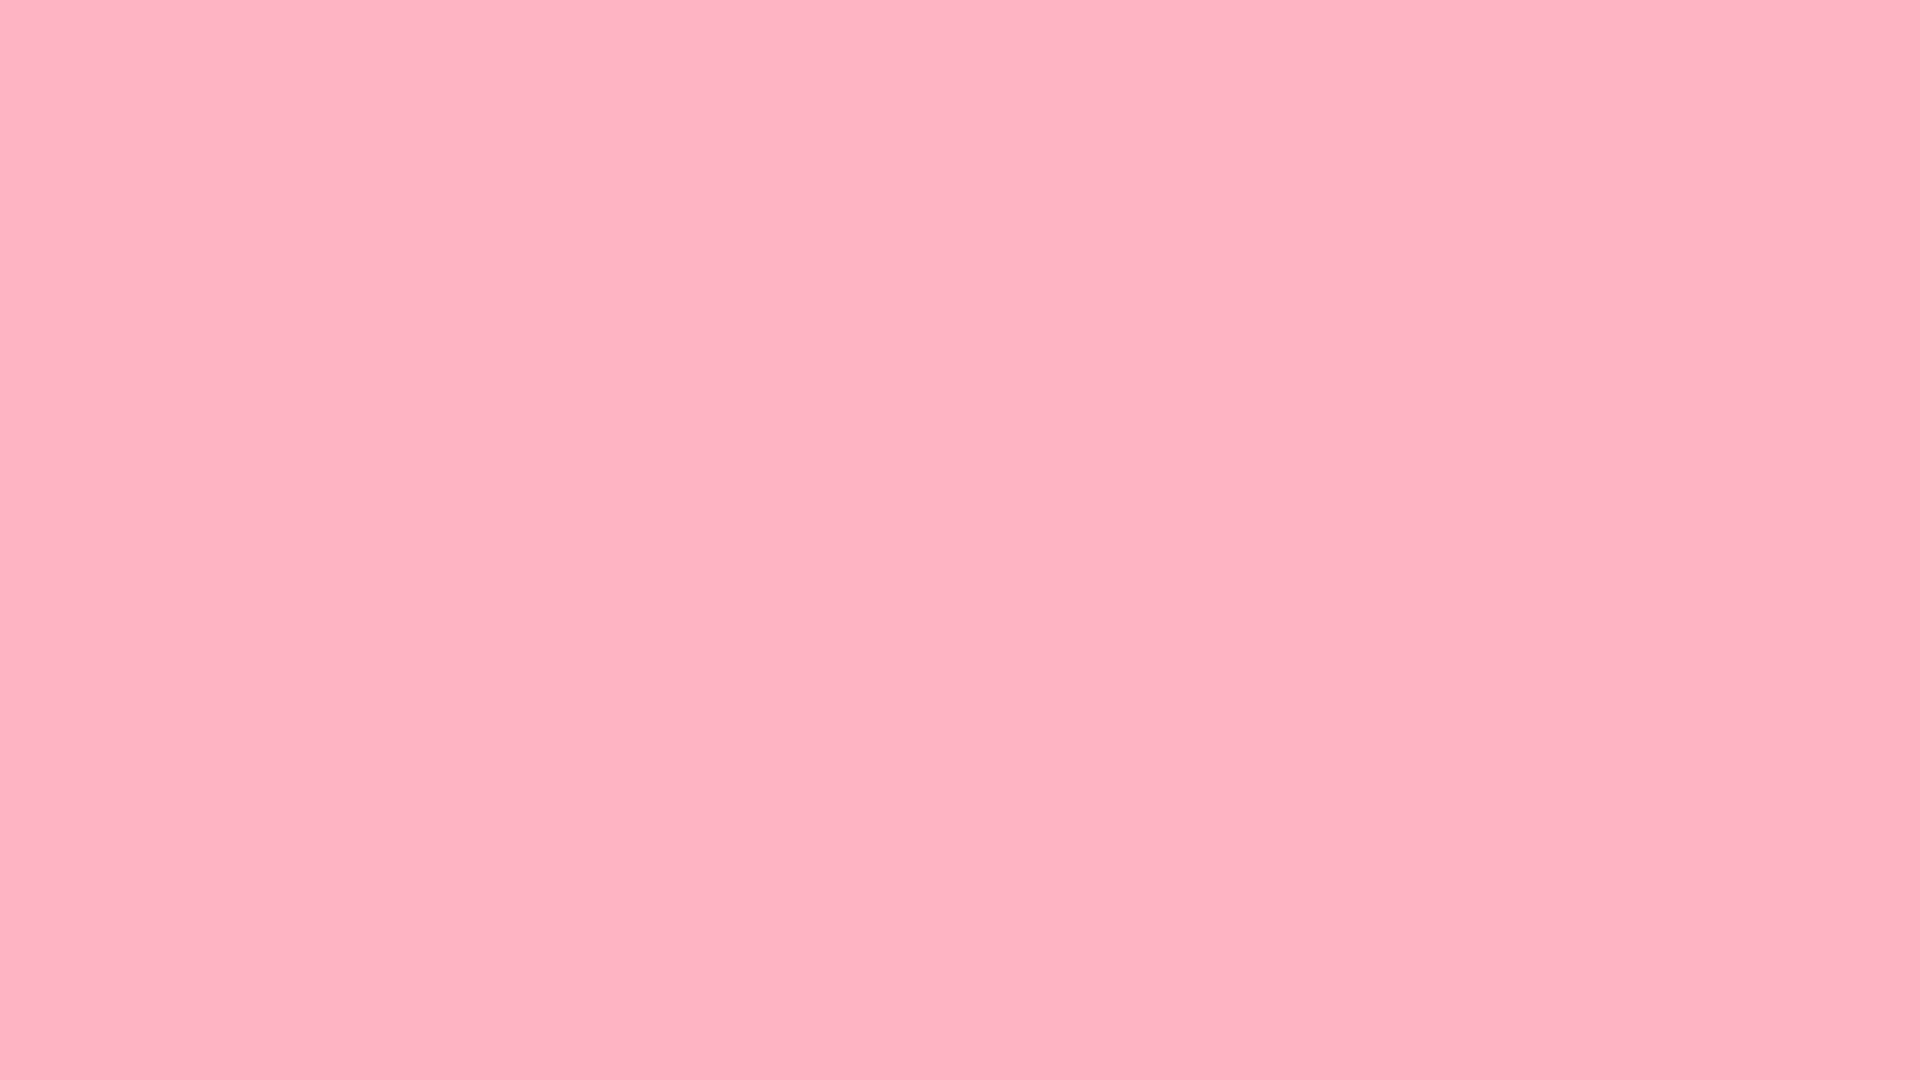 A pink background with a teddy bear and polka-dotted ribbon.